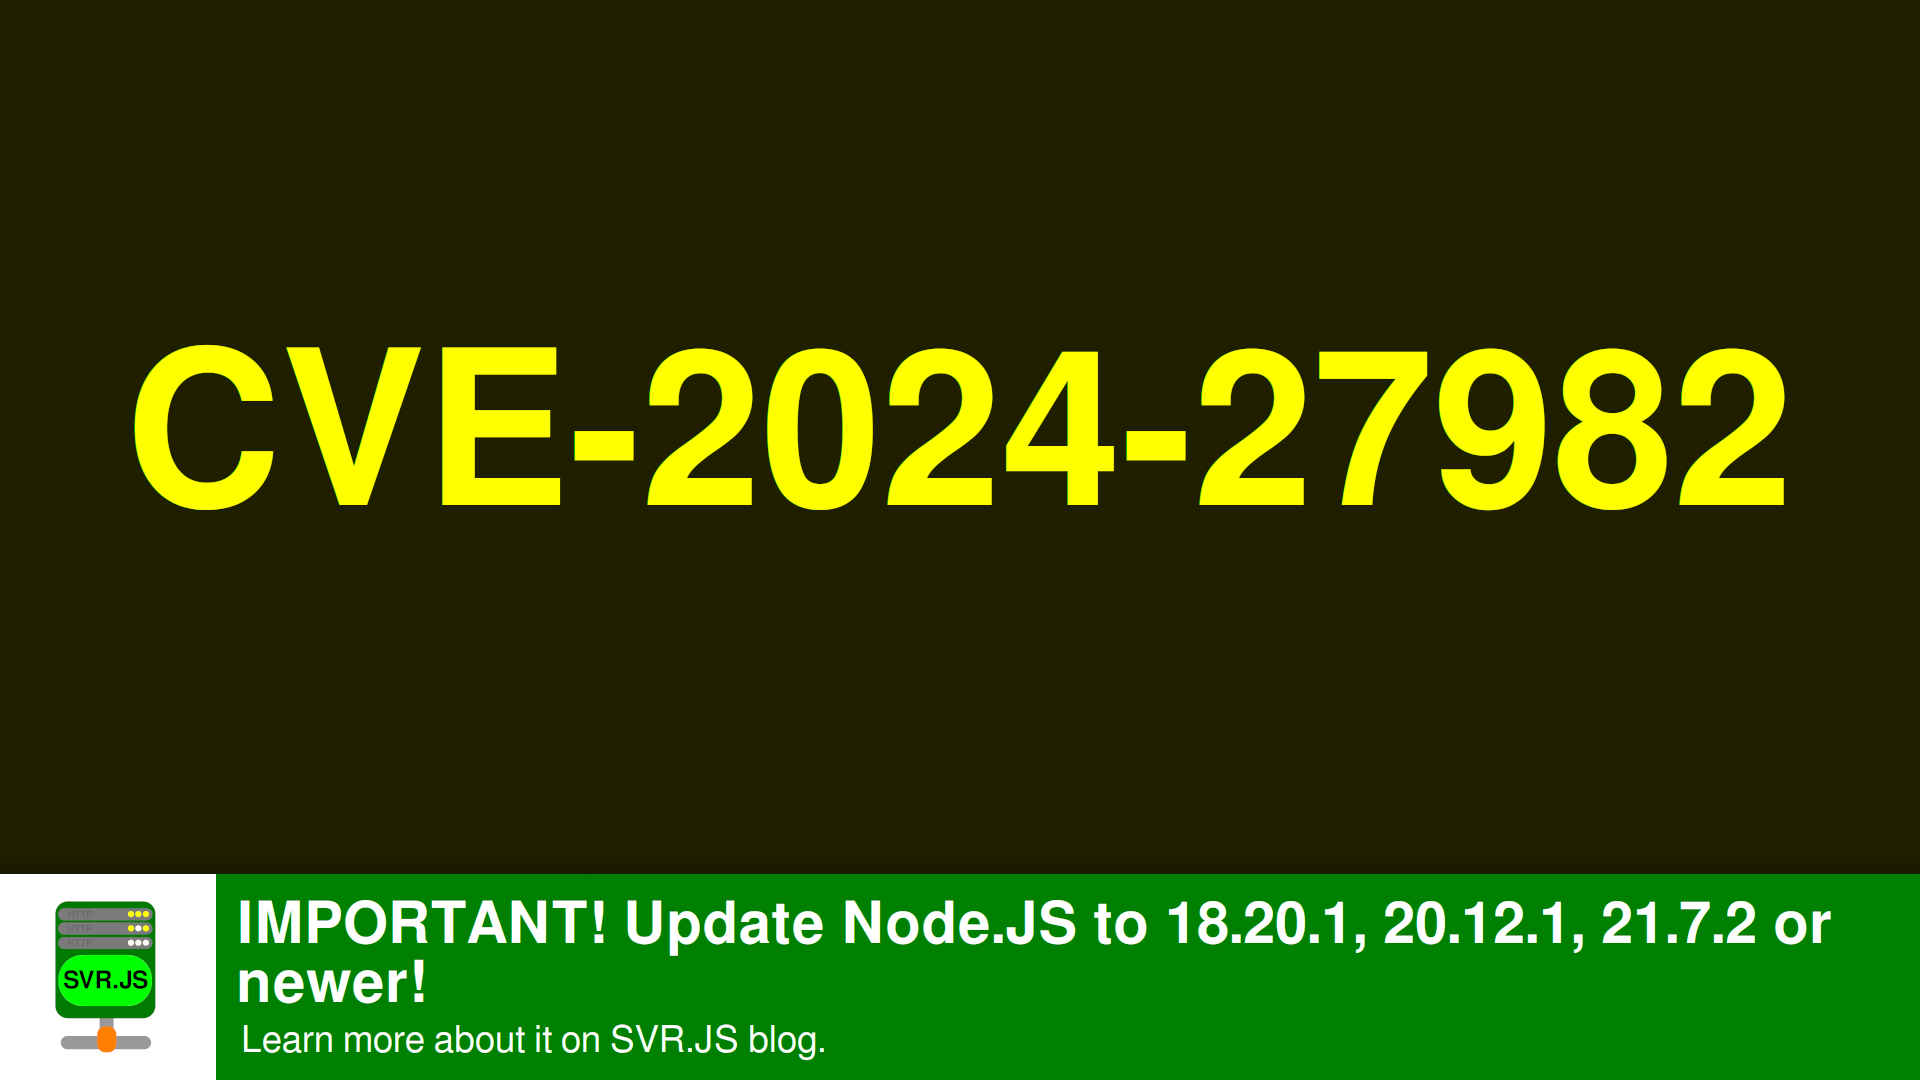 IMPORTANT! Update Node.JS to 18.20.1, 20.12.1, 21.7.2 or newer!